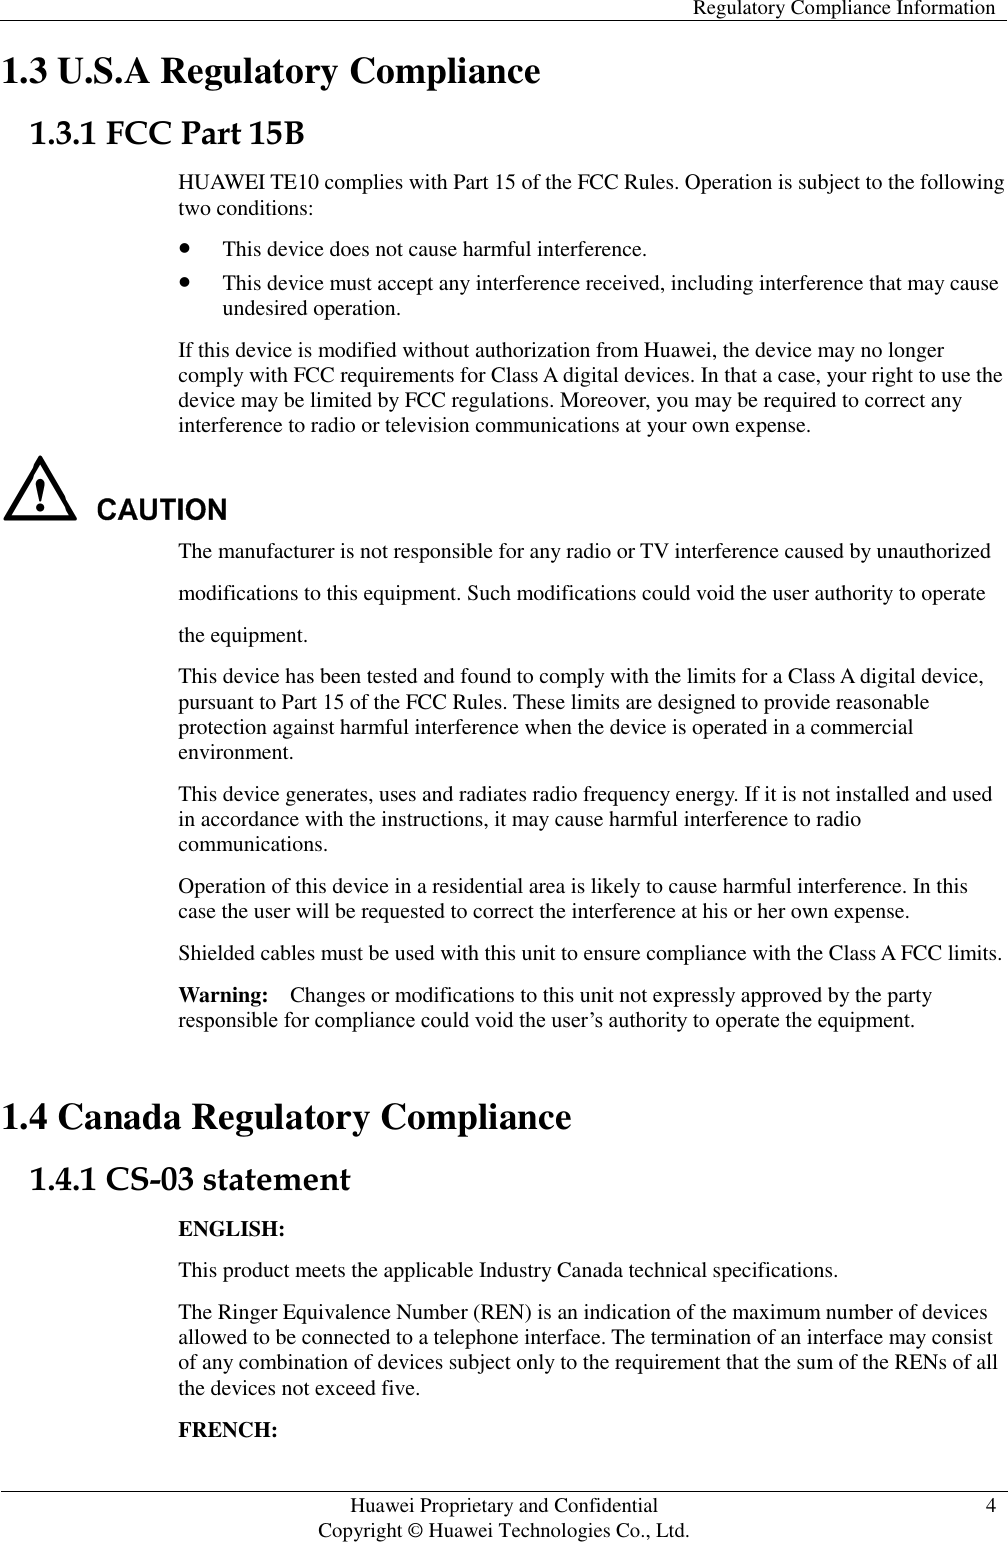   Regulatory Compliance Information   Huawei Proprietary and Confidential                                     Copyright © Huawei Technologies Co., Ltd. 4  1.3 U.S.A Regulatory Compliance 1.3.1 FCC Part 15B HUAWEI TE10 complies with Part 15 of the FCC Rules. Operation is subject to the following two conditions:  This device does not cause harmful interference.  This device must accept any interference received, including interference that may cause undesired operation. If this device is modified without authorization from Huawei, the device may no longer comply with FCC requirements for Class A digital devices. In that a case, your right to use the device may be limited by FCC regulations. Moreover, you may be required to correct any interference to radio or television communications at your own expense.  The manufacturer is not responsible for any radio or TV interference caused by unauthorized modifications to this equipment. Such modifications could void the user authority to operate the equipment. This device has been tested and found to comply with the limits for a Class A digital device, pursuant to Part 15 of the FCC Rules. These limits are designed to provide reasonable protection against harmful interference when the device is operated in a commercial environment. This device generates, uses and radiates radio frequency energy. If it is not installed and used in accordance with the instructions, it may cause harmful interference to radio communications. Operation of this device in a residential area is likely to cause harmful interference. In this case the user will be requested to correct the interference at his or her own expense. Shielded cables must be used with this unit to ensure compliance with the Class A FCC limits. Warning:  Changes or modifications to this unit not expressly approved by the party responsible for compliance could void the user’s authority to operate the equipment. 1.4 Canada Regulatory Compliance 1.4.1 CS-03 statement ENGLISH: This product meets the applicable Industry Canada technical specifications.   The Ringer Equivalence Number (REN) is an indication of the maximum number of devices allowed to be connected to a telephone interface. The termination of an interface may consist of any combination of devices subject only to the requirement that the sum of the RENs of all the devices not exceed five. FRENCH: 